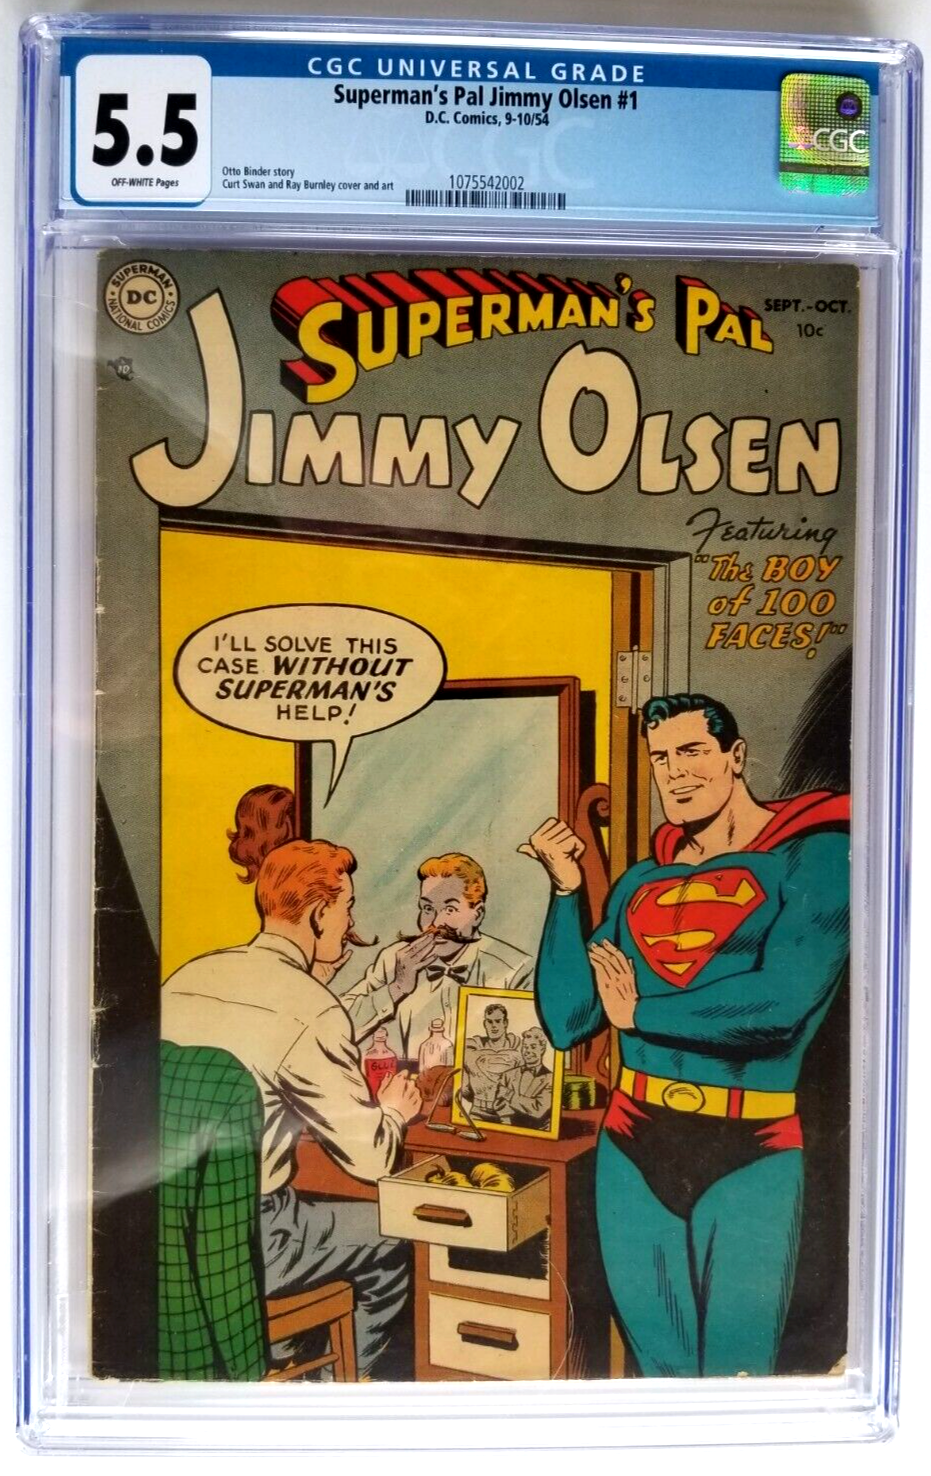 SUPERMANS PAL JIMMY OLSEN 1 CGC F55 DC 54 BRAND NEW HOLDER  OFFWHITE PAGES